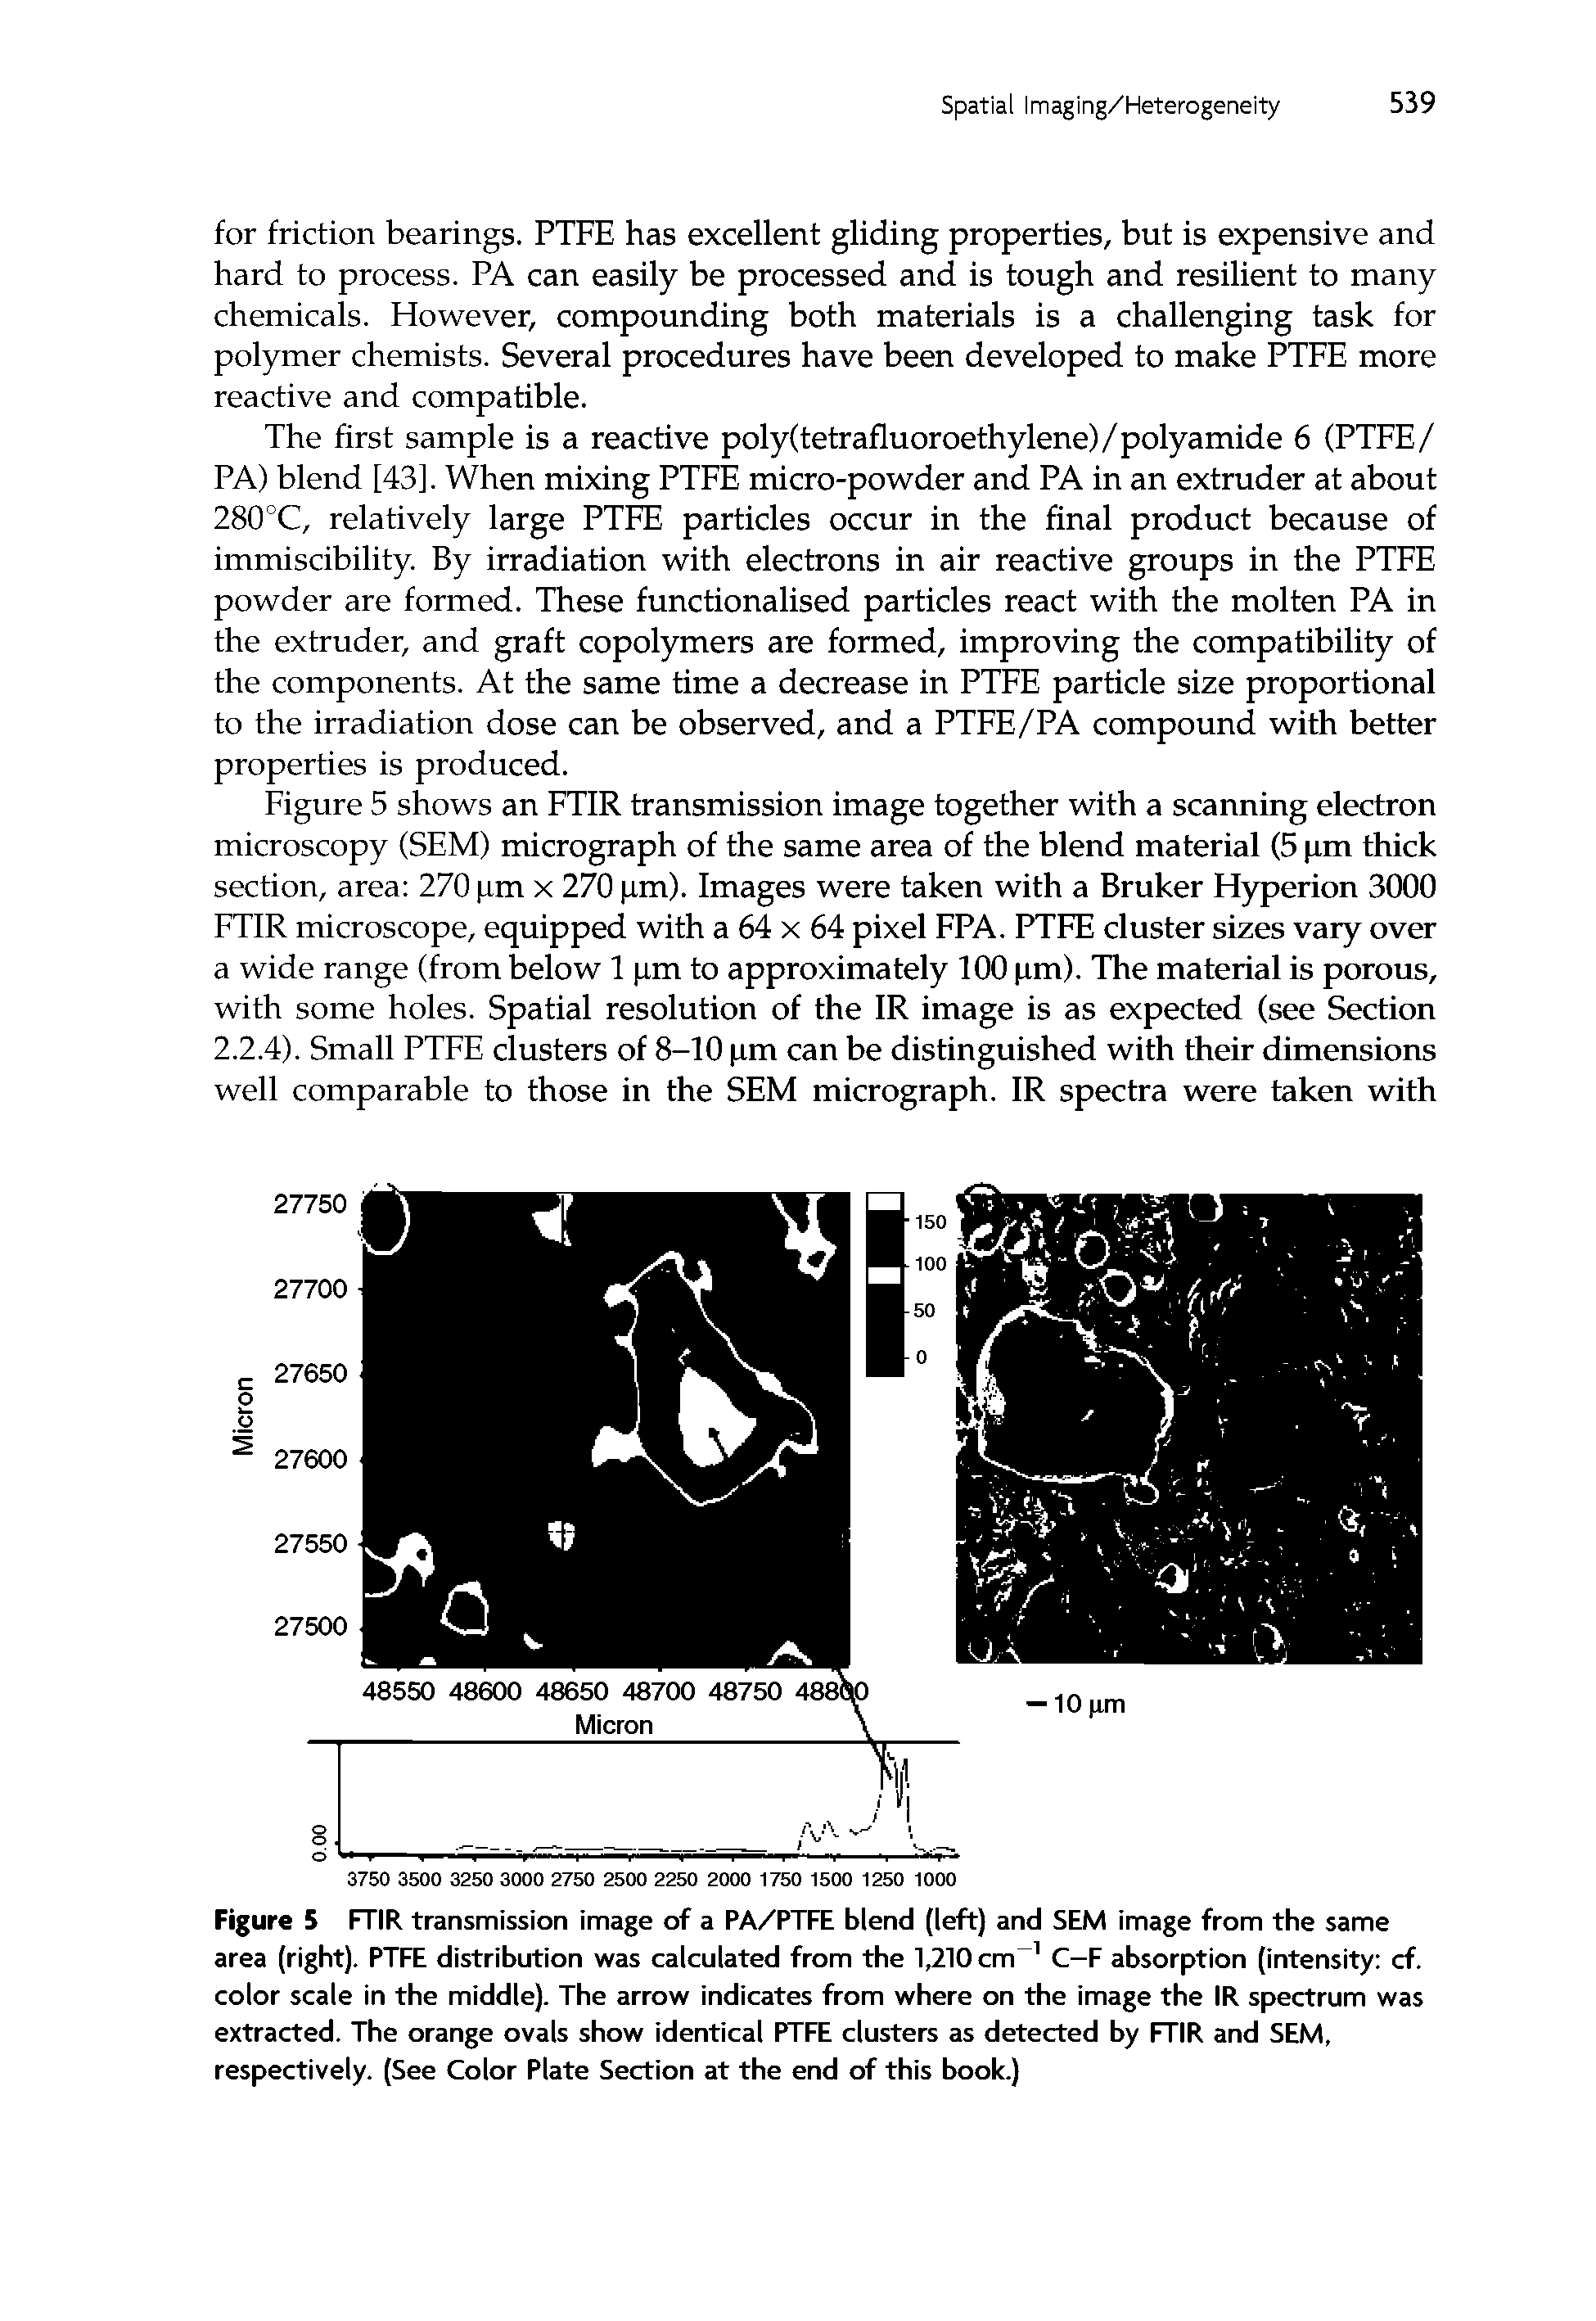 Figure 5 FTIR transmission image of a PA/PTFE blend (left) and SEM image from the same area (right). PTFE distribution was calculated from the 1,210 cm 1 C-F absorption (intensity cf. color scale in the middle). The arrow indicates from where on the image the IR spectrum was extracted. The orange ovals show identical PTFE clusters as detected by FTIR and SEM, respectively. (See Color Plate Section at the end of this book.)...